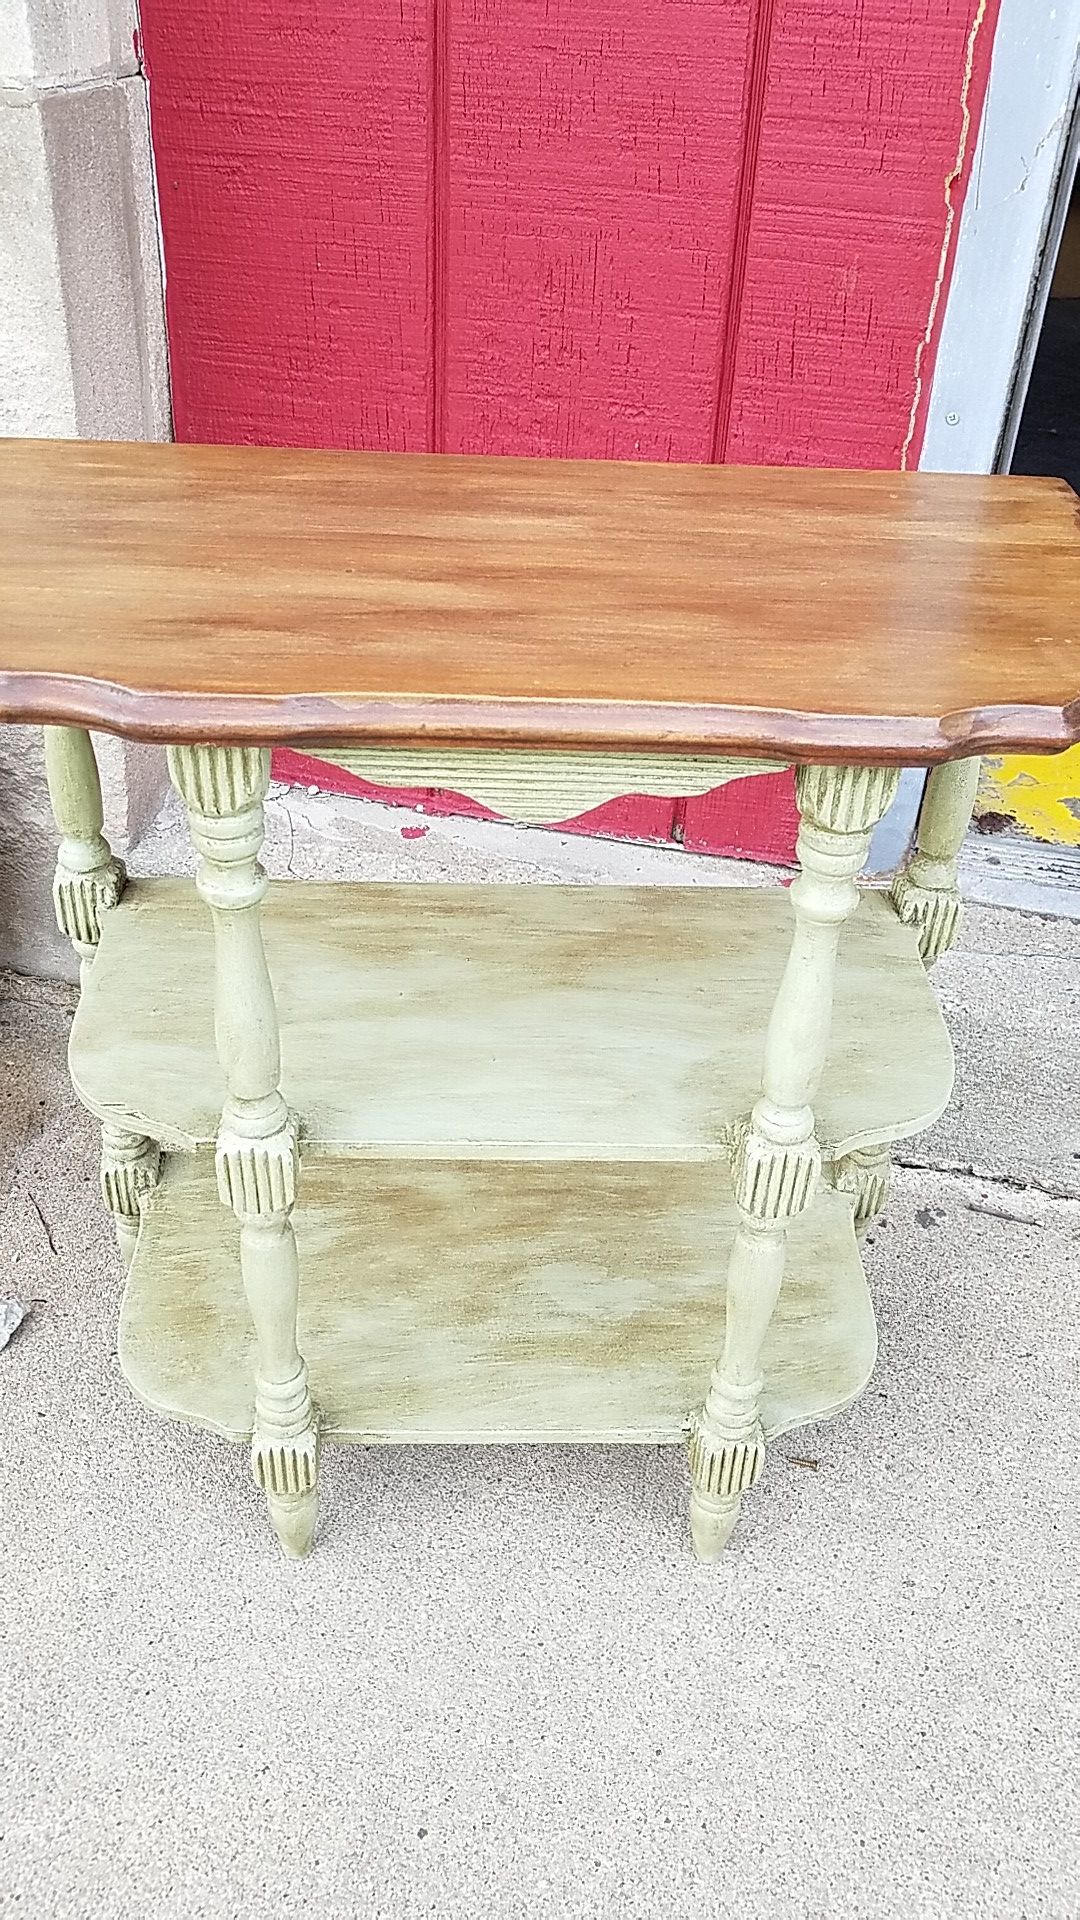 Custom shabby chic refinished vintage small table with double under Shelf